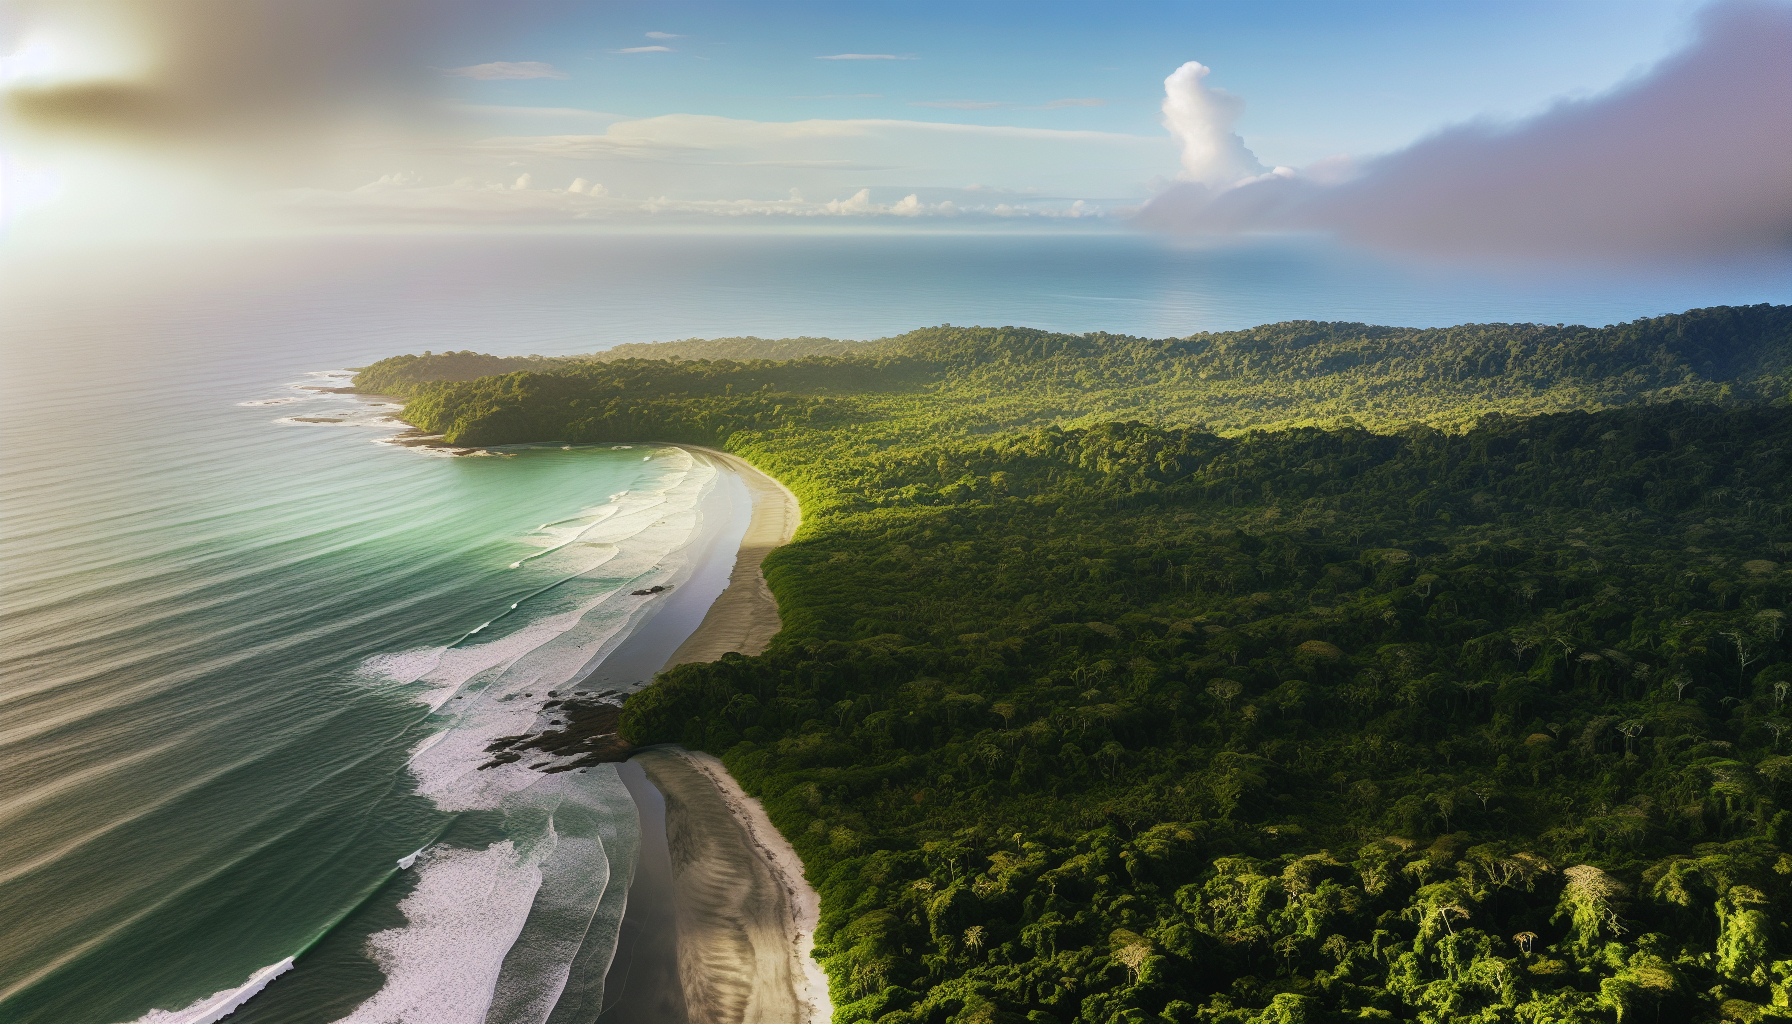 Aerial view of Osa Peninsula coastline with remote beaches and lush rainforest